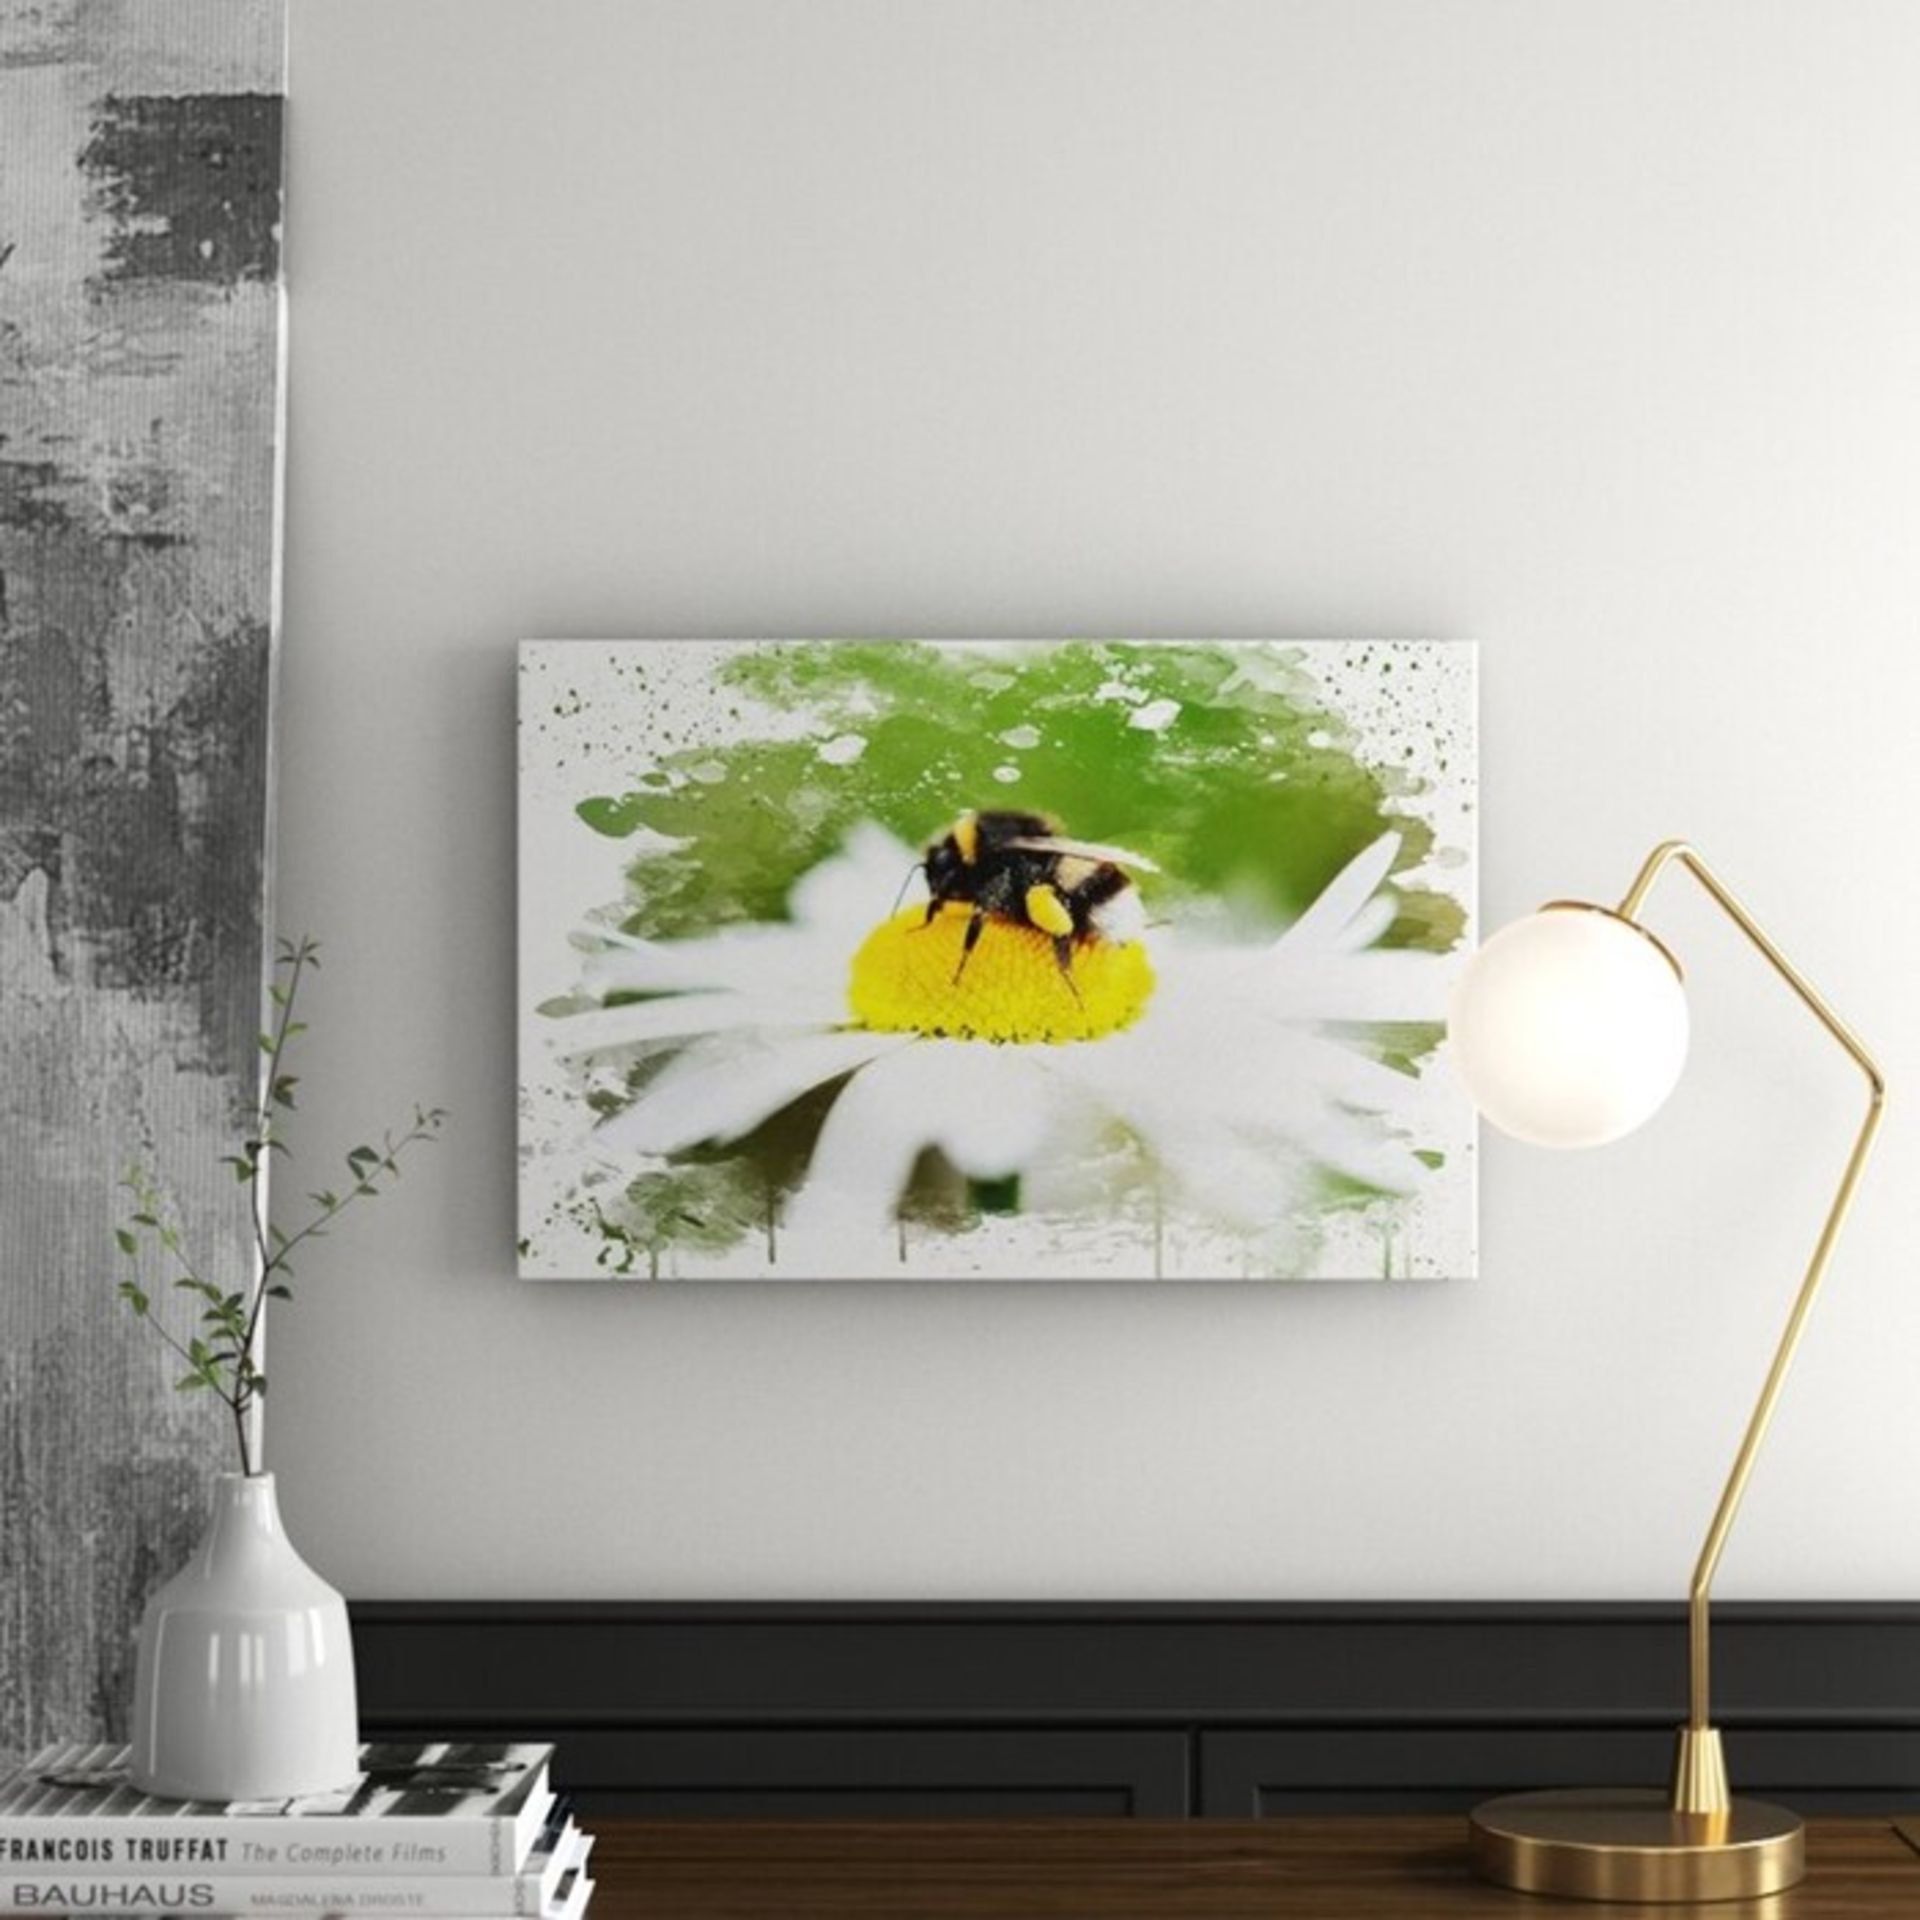 East Urban Home,'Bumble Bee White Daisy' Graphic Art Print on CanvasRRP -£55.99 (15266/3 -WLDJ4559)